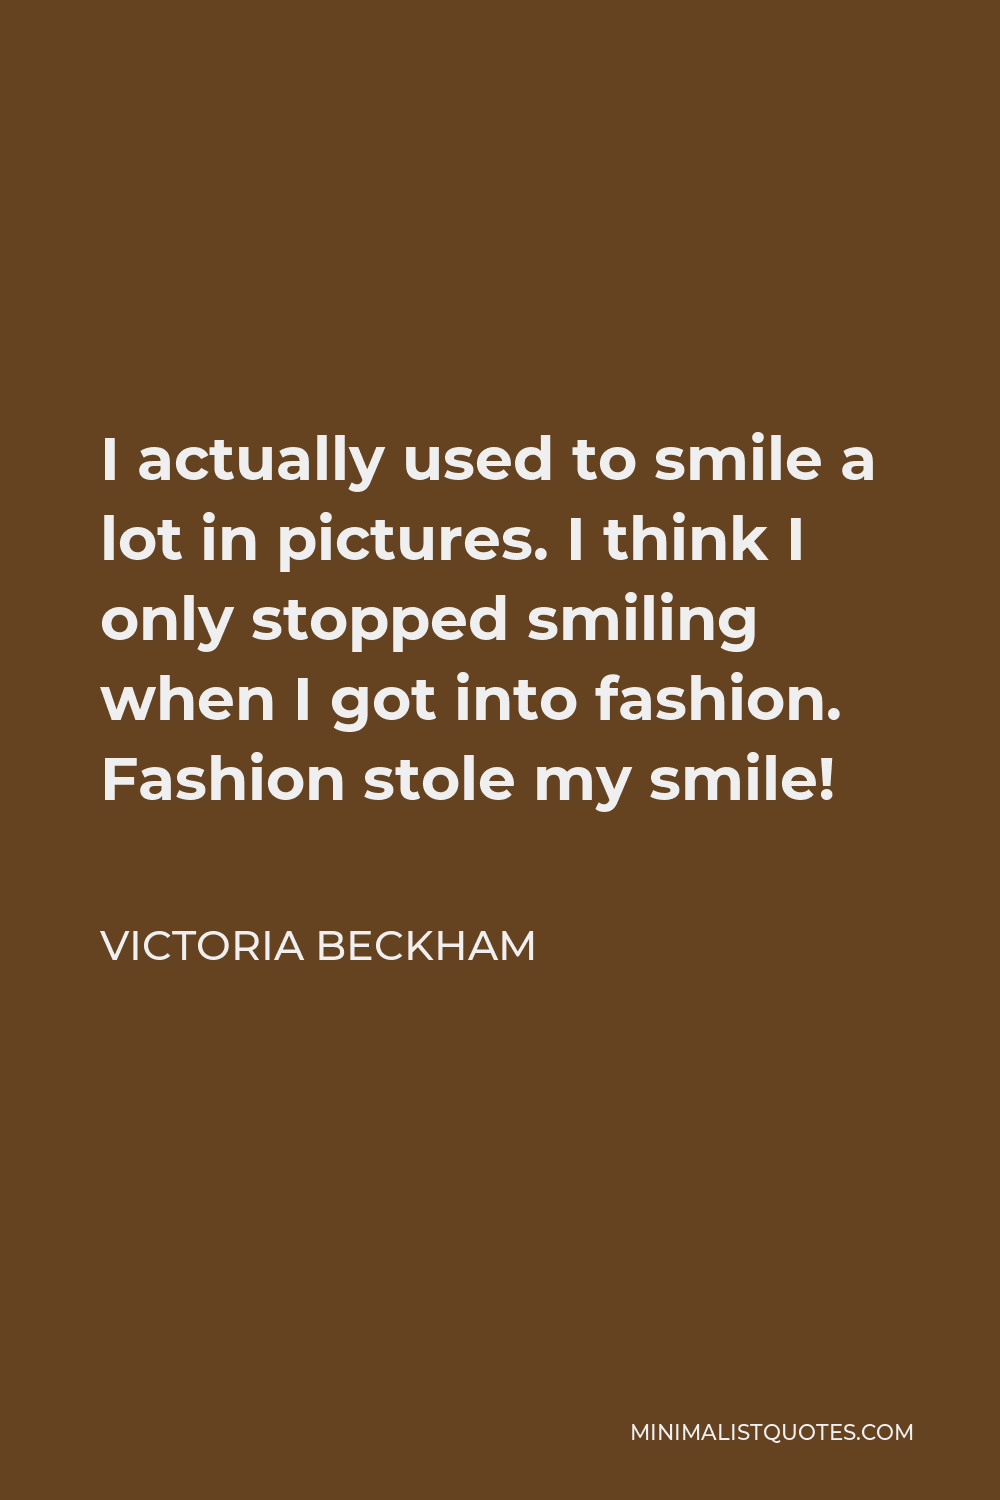 Victoria Beckham Quote - I actually used to smile a lot in pictures. I think I only stopped smiling when I got into fashion. Fashion stole my smile!